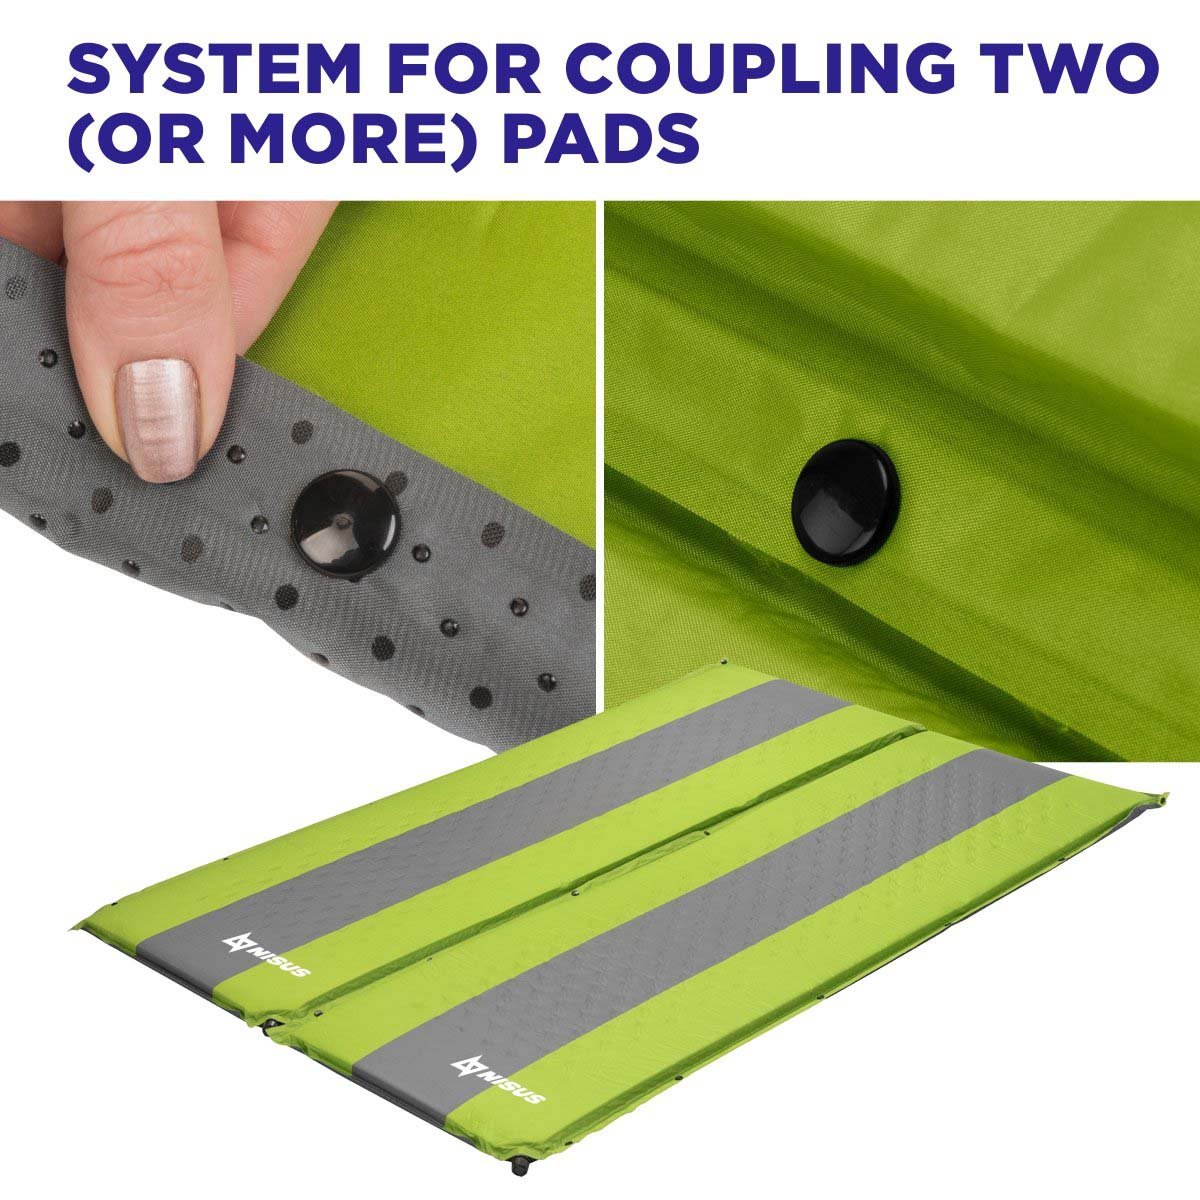 Carrying a couple of 2-inch Lightweight Self Inflating Camping Sleeping Pads, you could easily connect them to each other to make one big sleeping place